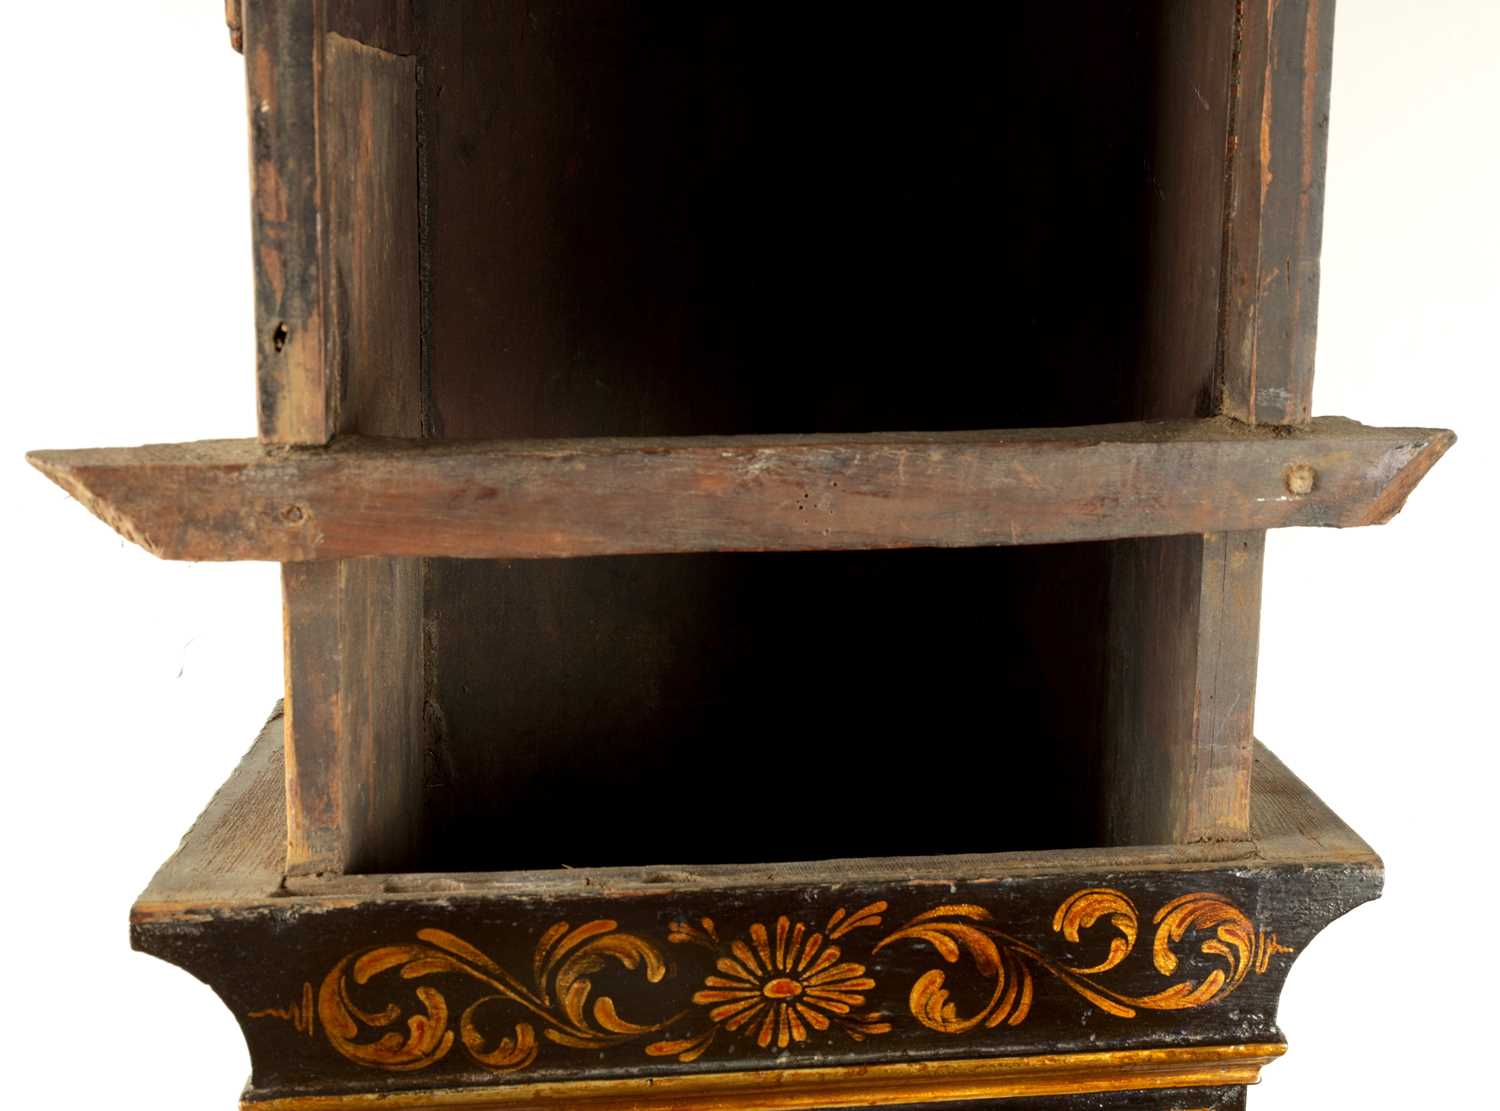 JOHN TICKELL, CREDITON. A RARE EARLY 18TH CENTURY LACQUERED CHINOISERIE TAVERN CLOCK OF LARGE SIZE - Image 17 of 21